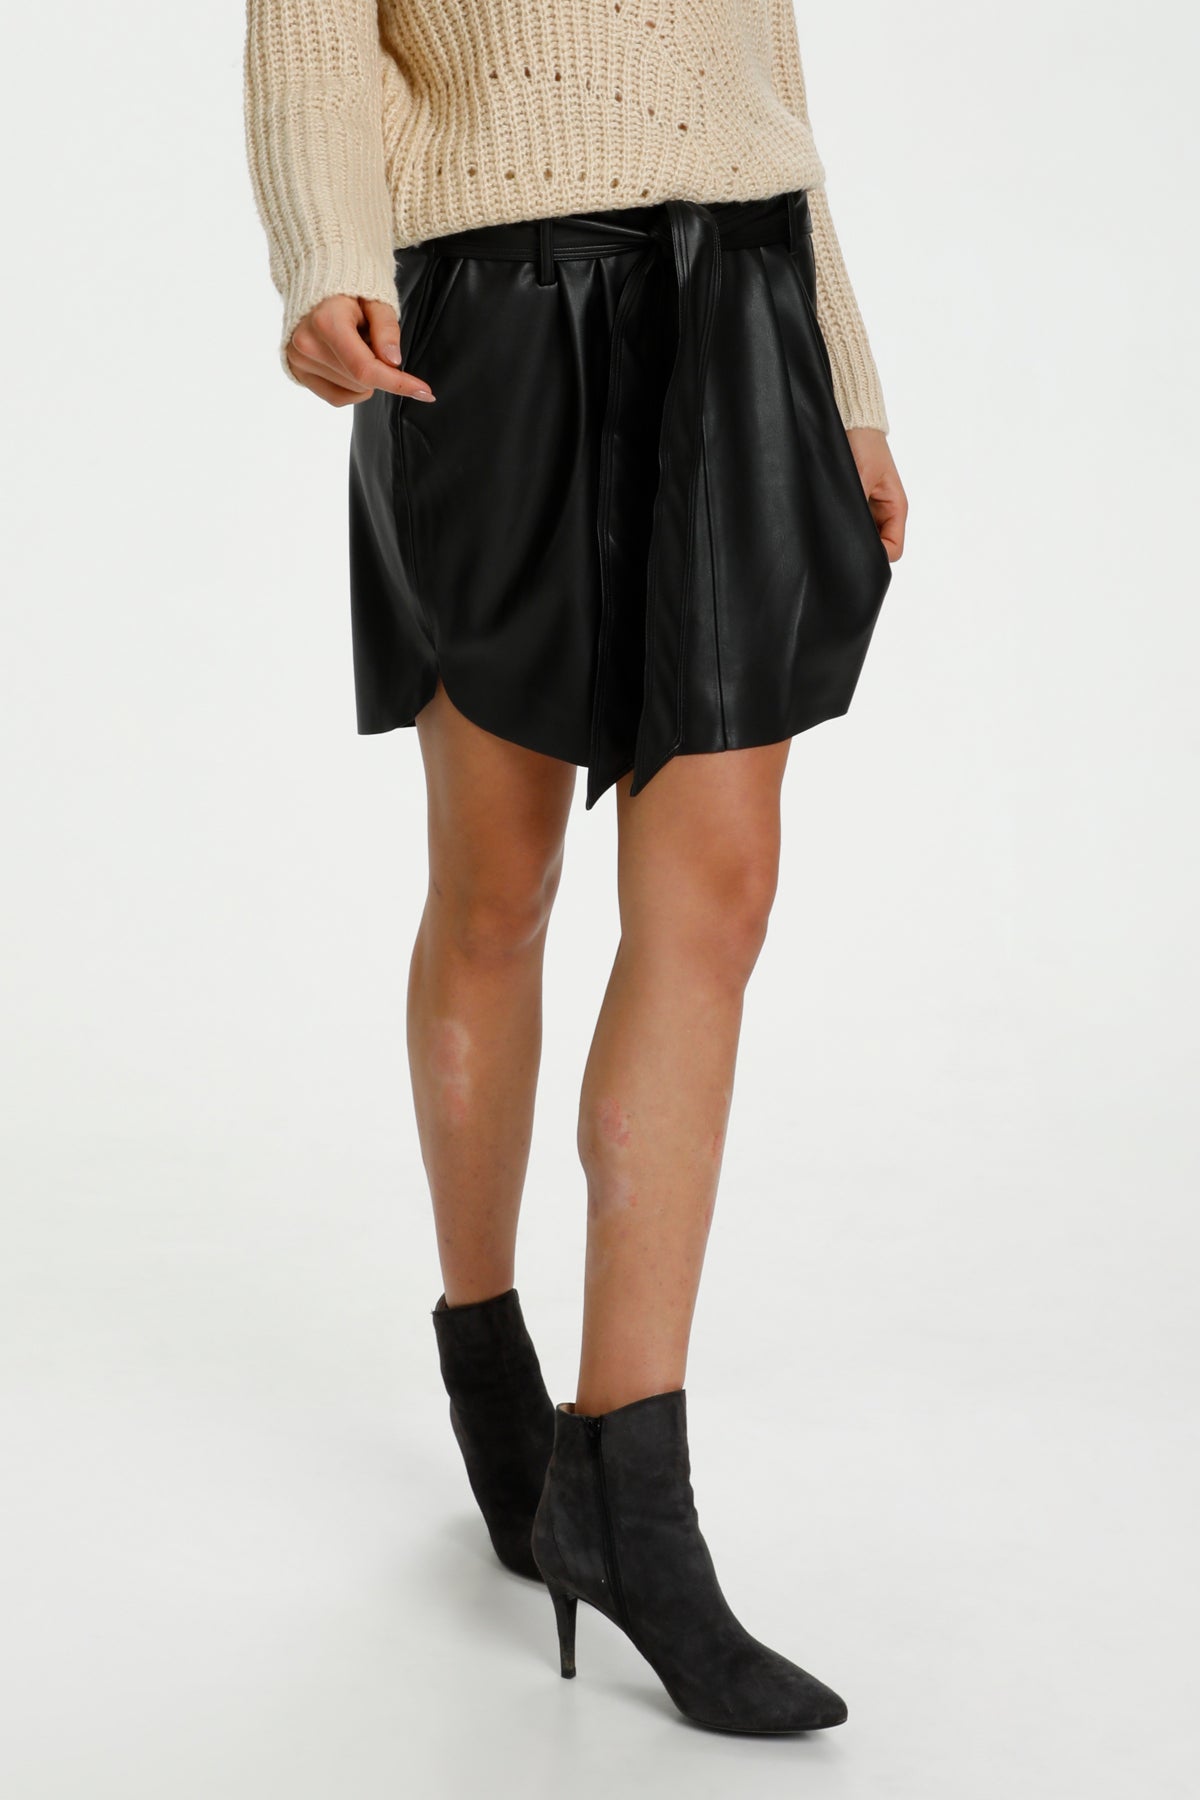 Candrea faux leather skirt